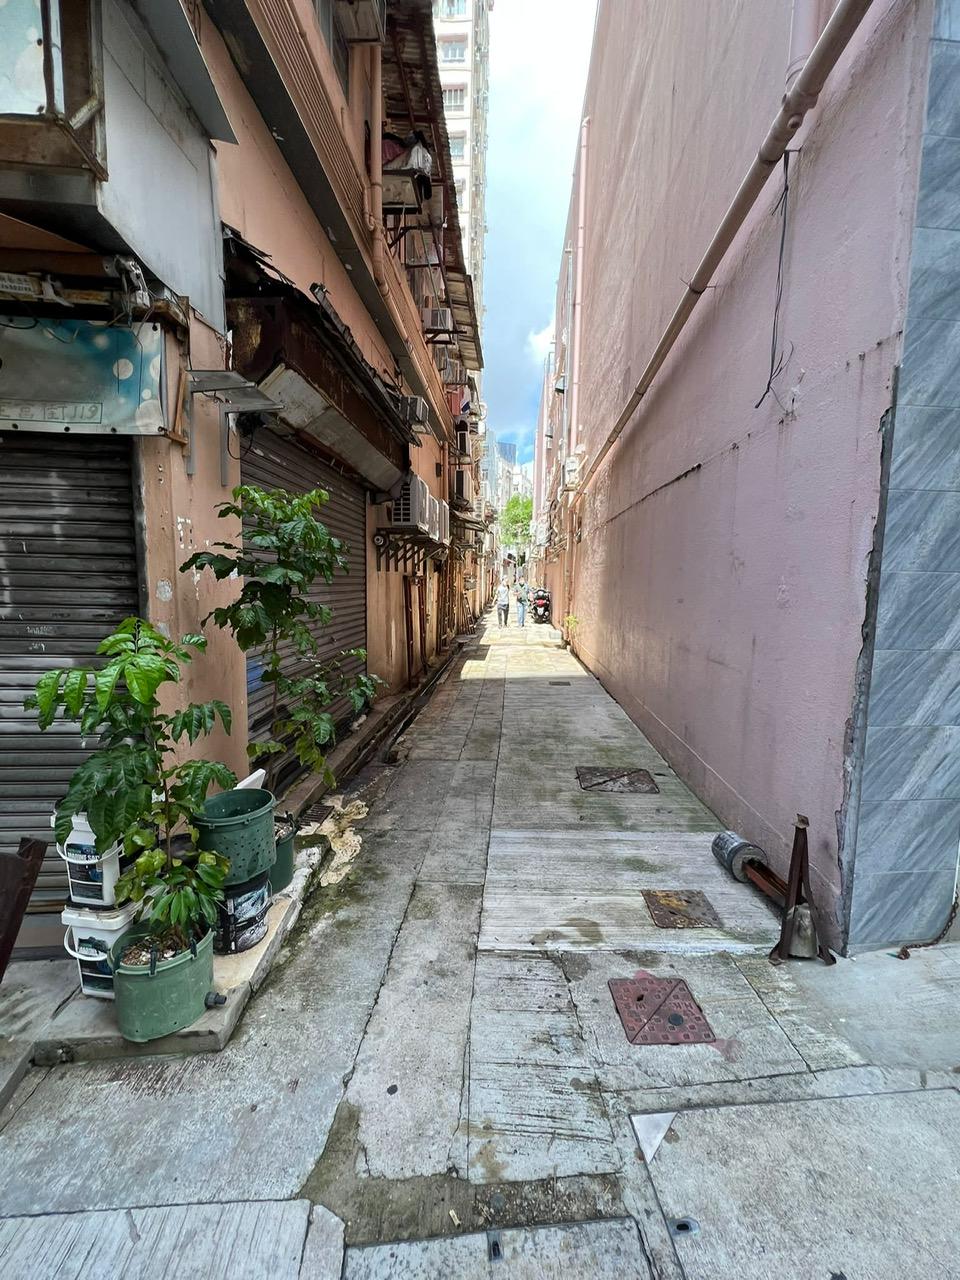 The Home Affairs Department and its District Offices conducted a series of cleaning works, publicity and educational activities during July and August to support the Government Programme on Tackling Hygiene Black Spots launched under the District Matters Co-ordination Task Force. Photo shows a back alley in Kwun Tong after the joint operation for removal of abandoned vehicles co-ordinated by the Kwun Tong District Office and relevant departments. 